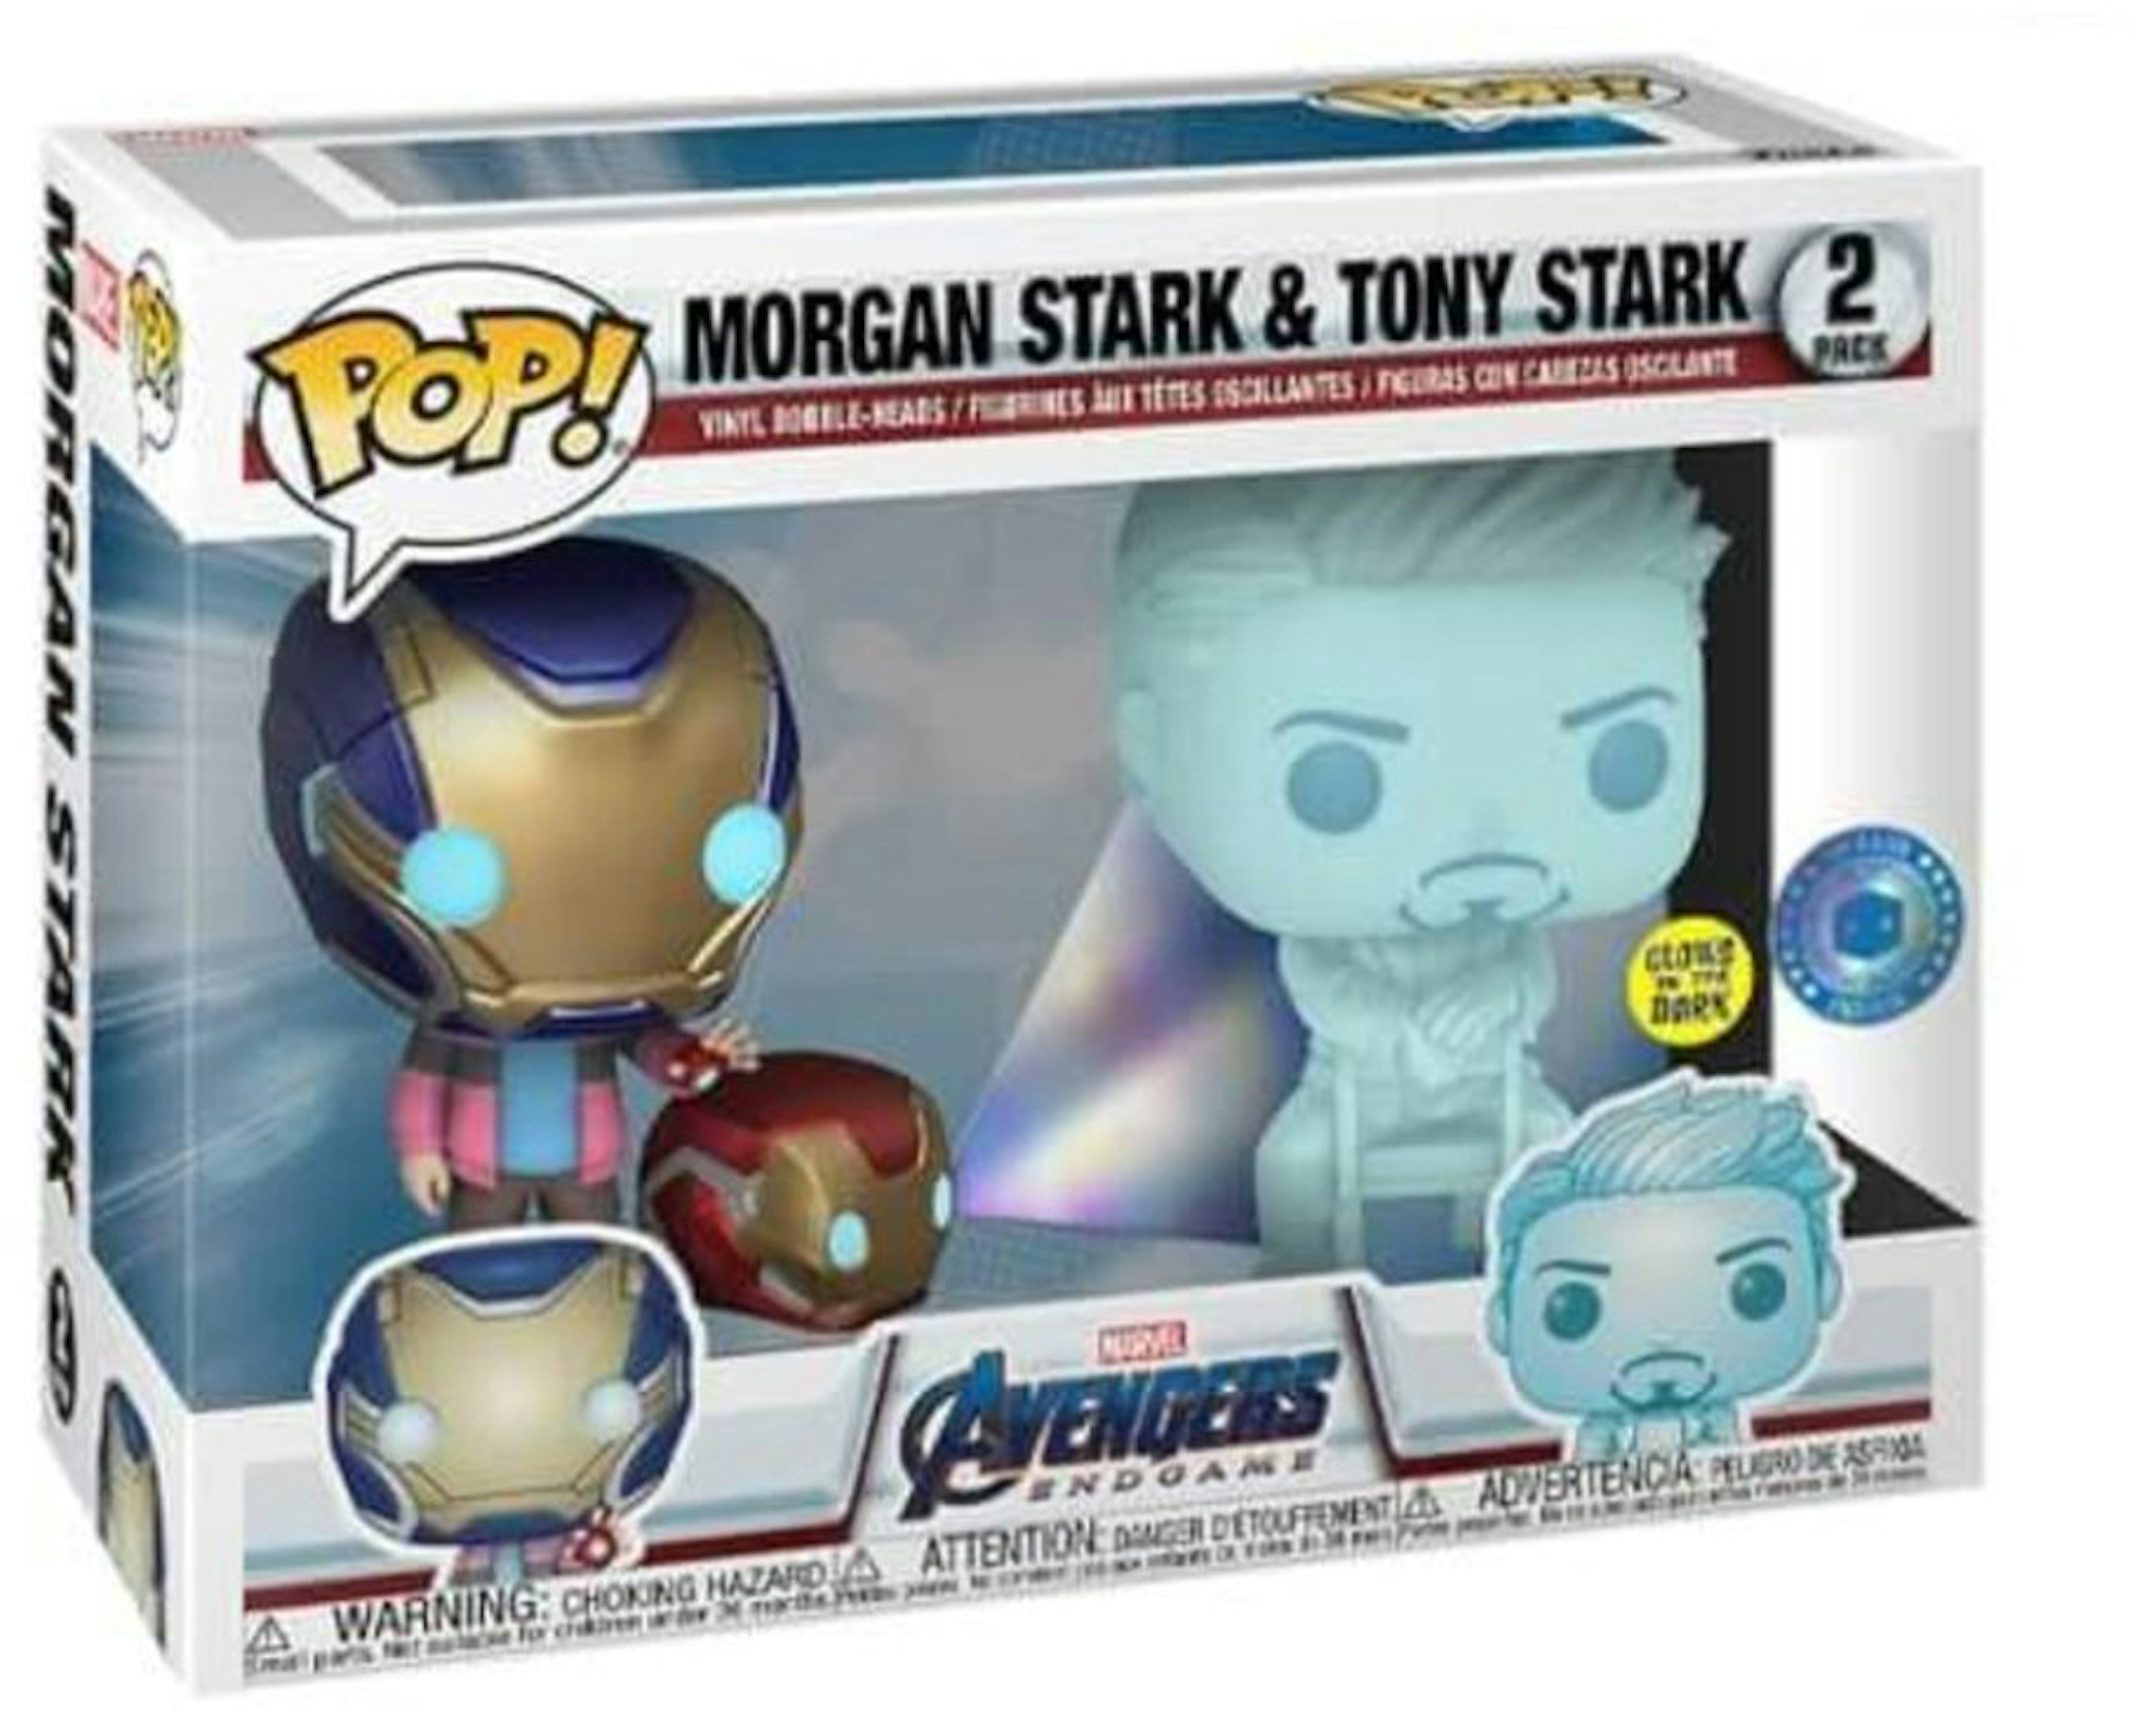 https://images.stockx.com/images/Funko-Pop-Marvel-Avengers-Endgame-Morgan-Stark-and-Tony-Stark-Pop-In-A-Box-Exclusive-Glow-2-Pack.jpg?fit=fill&bg=FFFFFF&w=1200&h=857&fm=jpg&auto=compress&dpr=2&trim=color&updated_at=1611177028&q=60